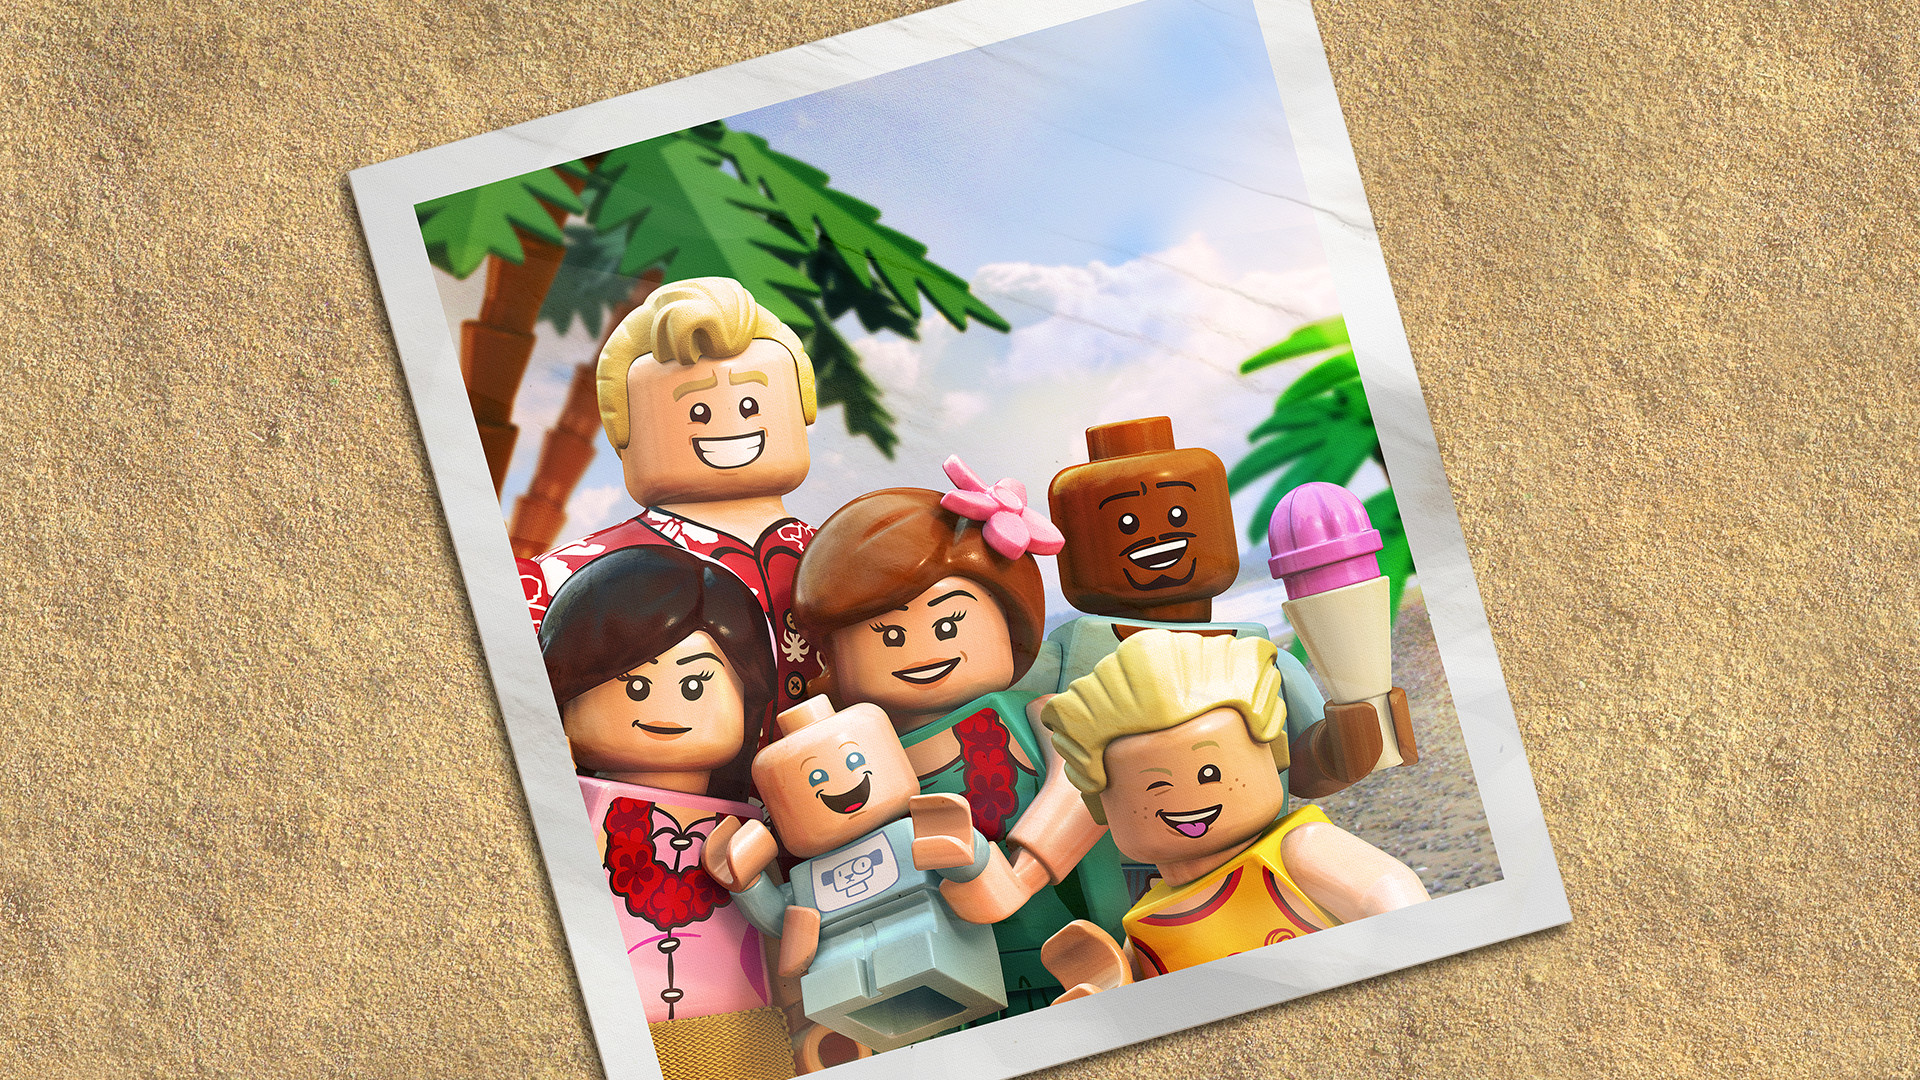 LEGO THE INCREDIBLES - Parr Family Vacation Character Pack DLC EU PS5 CD Key 0.73$